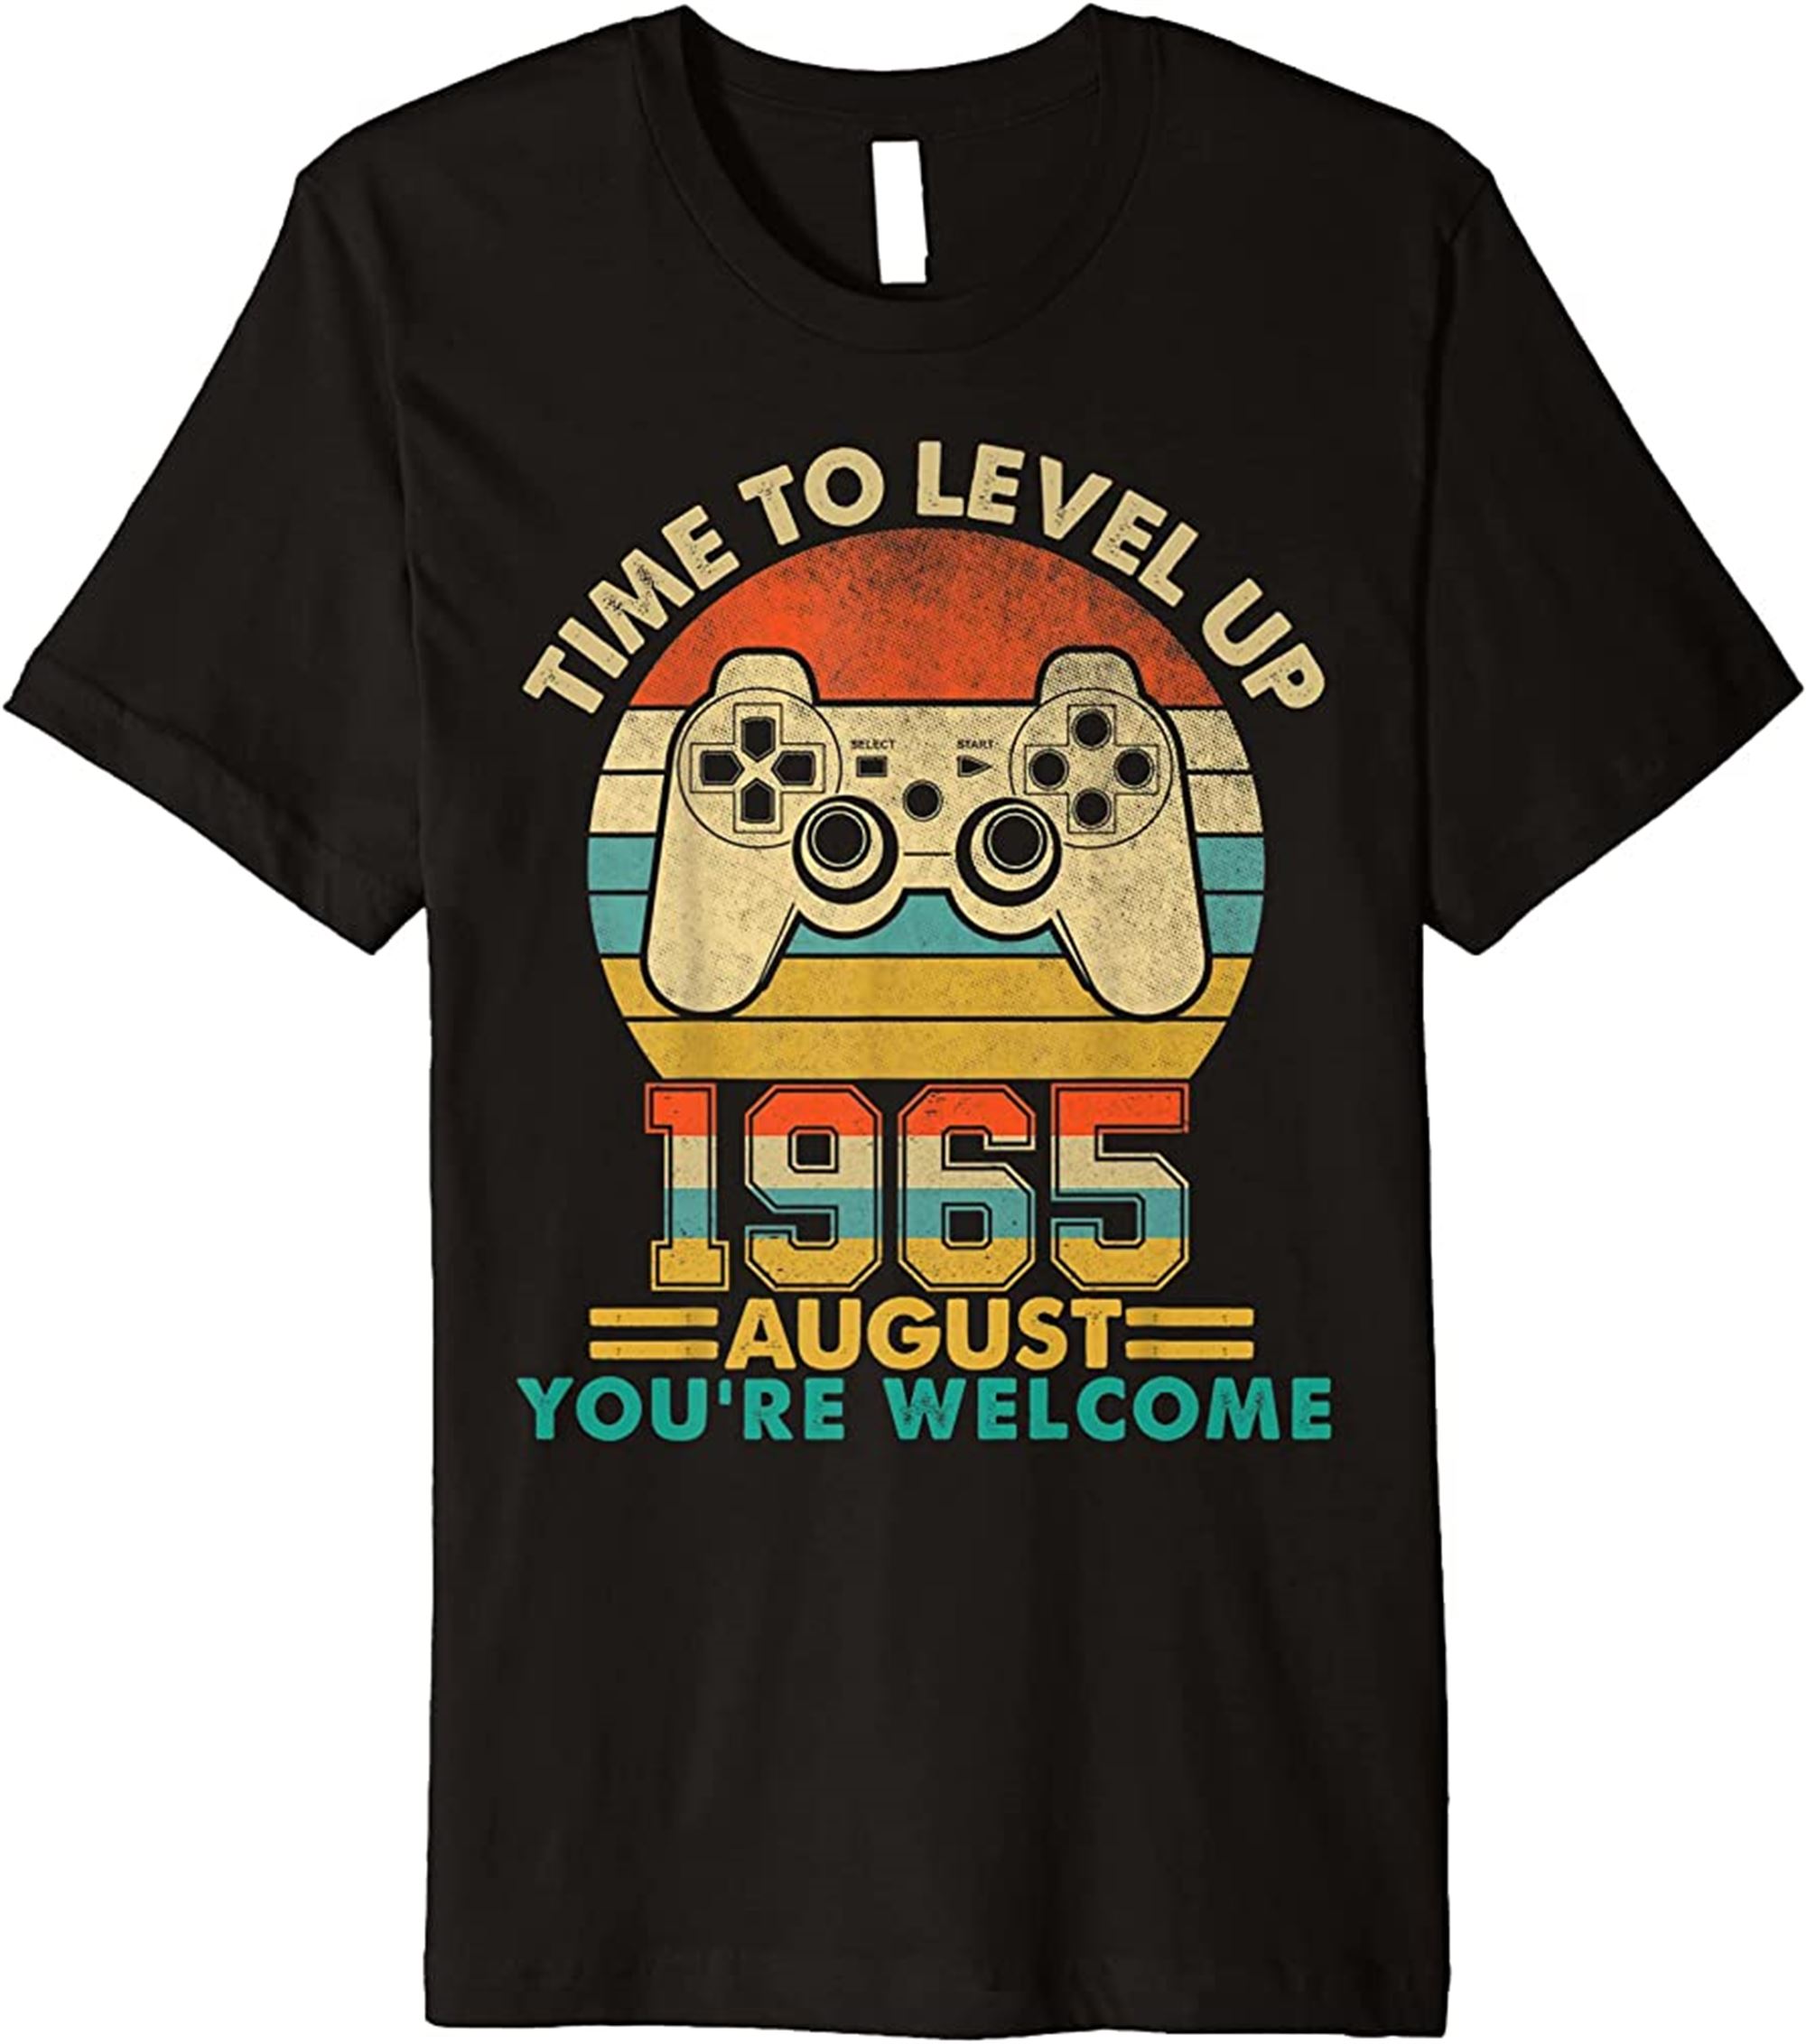 Vintage 1965 August 57 Years Old Video Gamer 57th Birthday Premium T-shirt Plus Size Up To 5xl